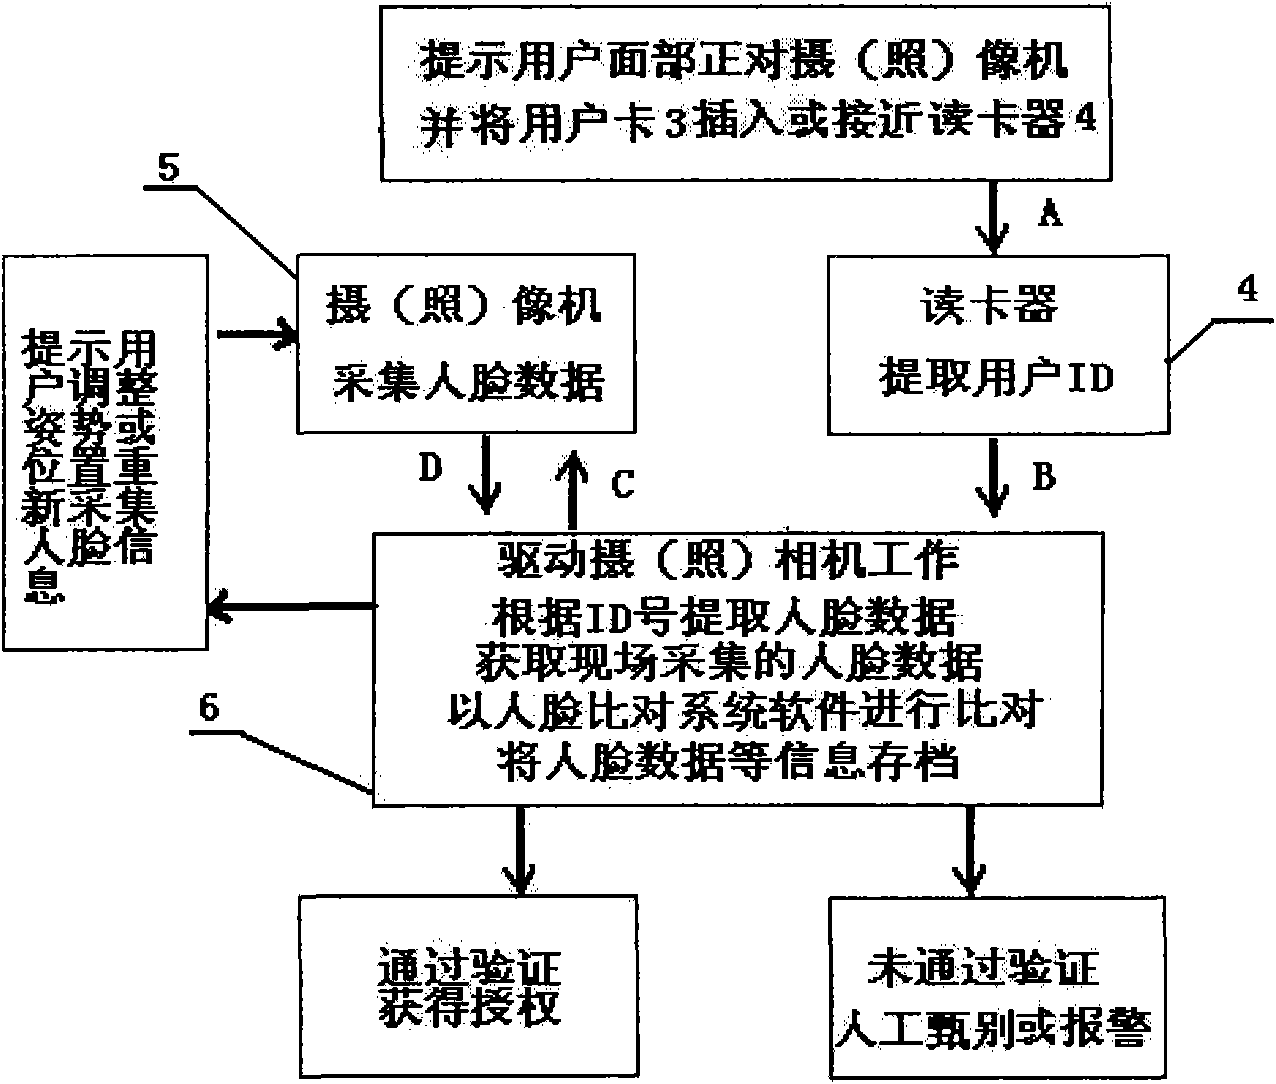 Method and system for human face comparison identity identification